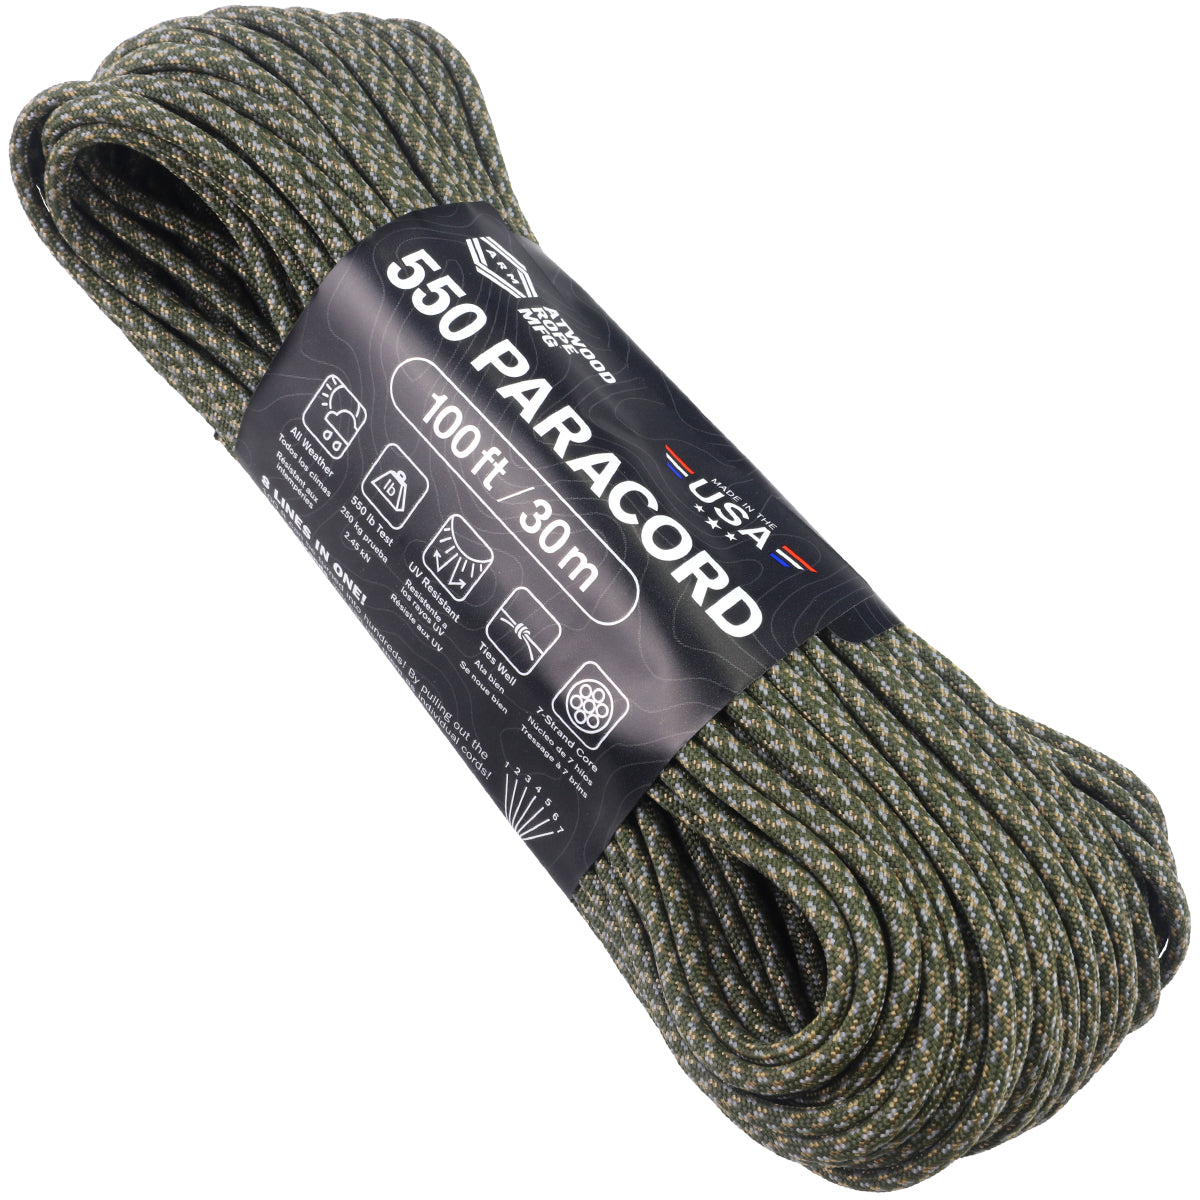 Atwood Rope MFG Color Changing 550 Paracord 100 Feet 7-Strand Core